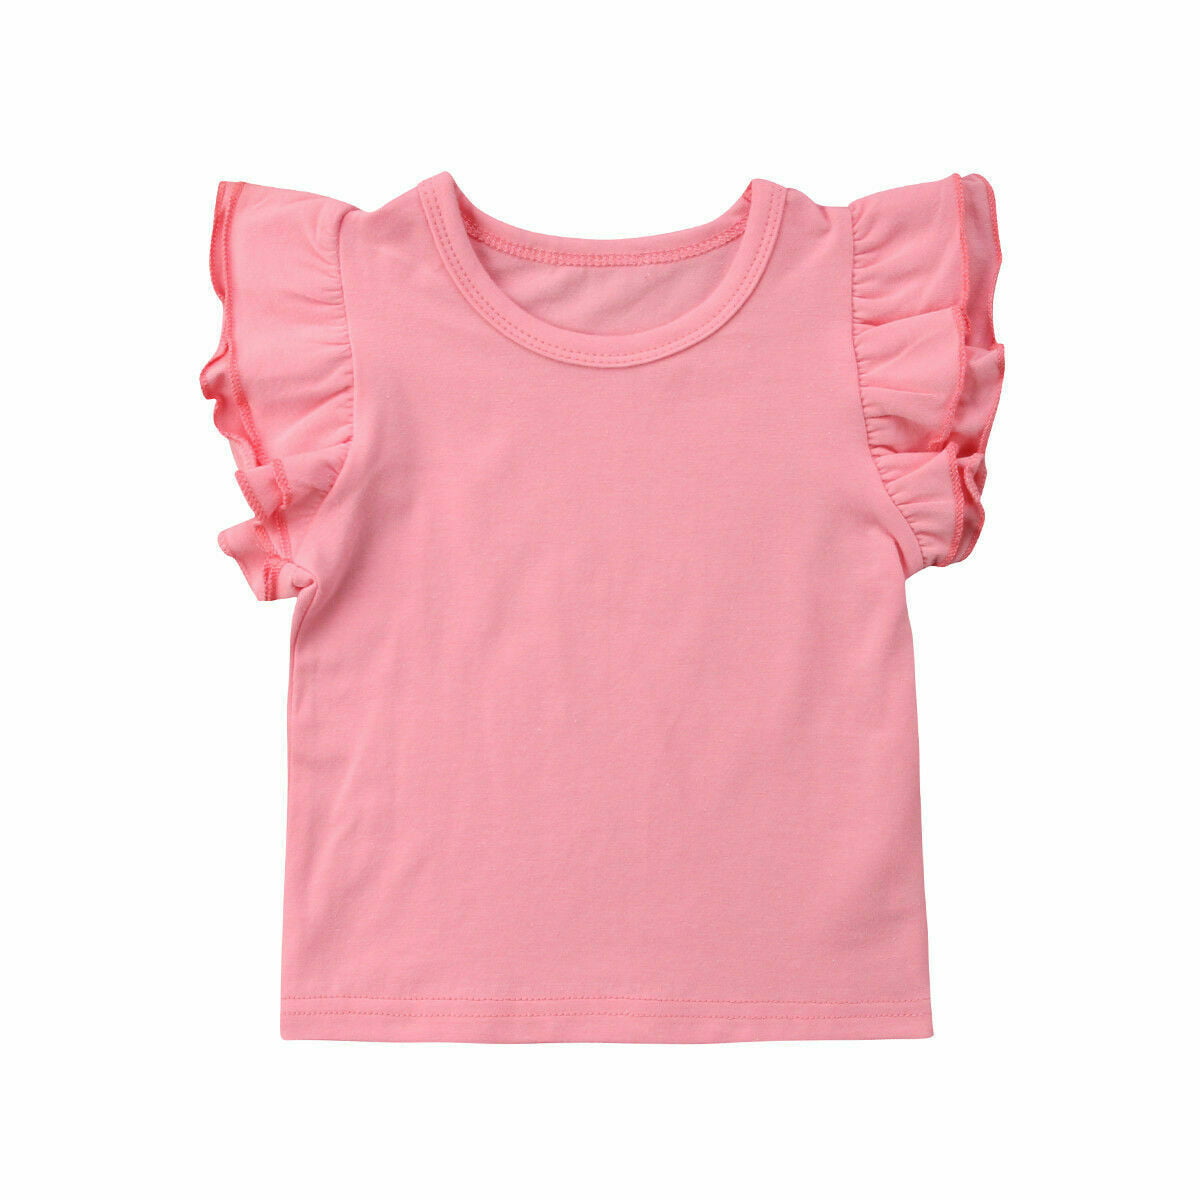 Toddler Baby Girl Ruffle Lantern Sleeve Plain Blouse T-Shirt Top Outfit Clothes 